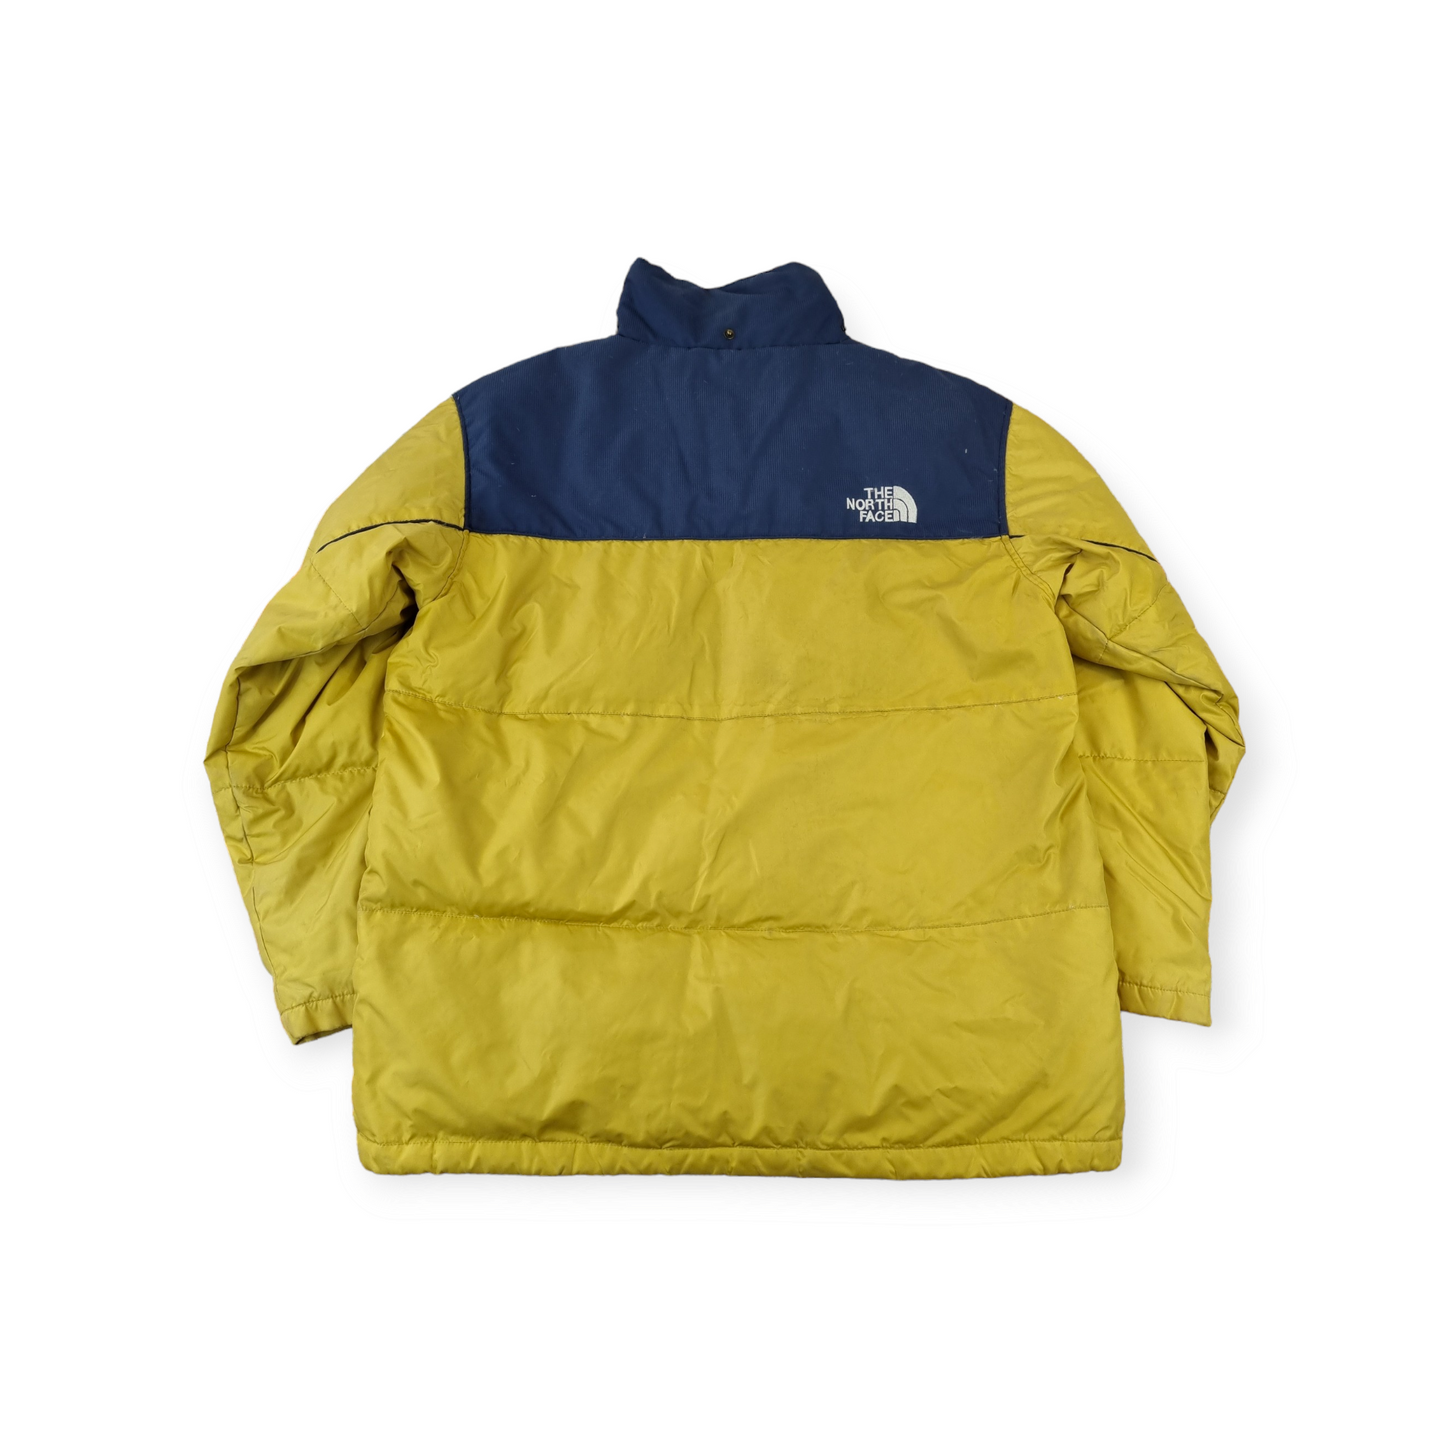 The North Face Puffer (L-XL)